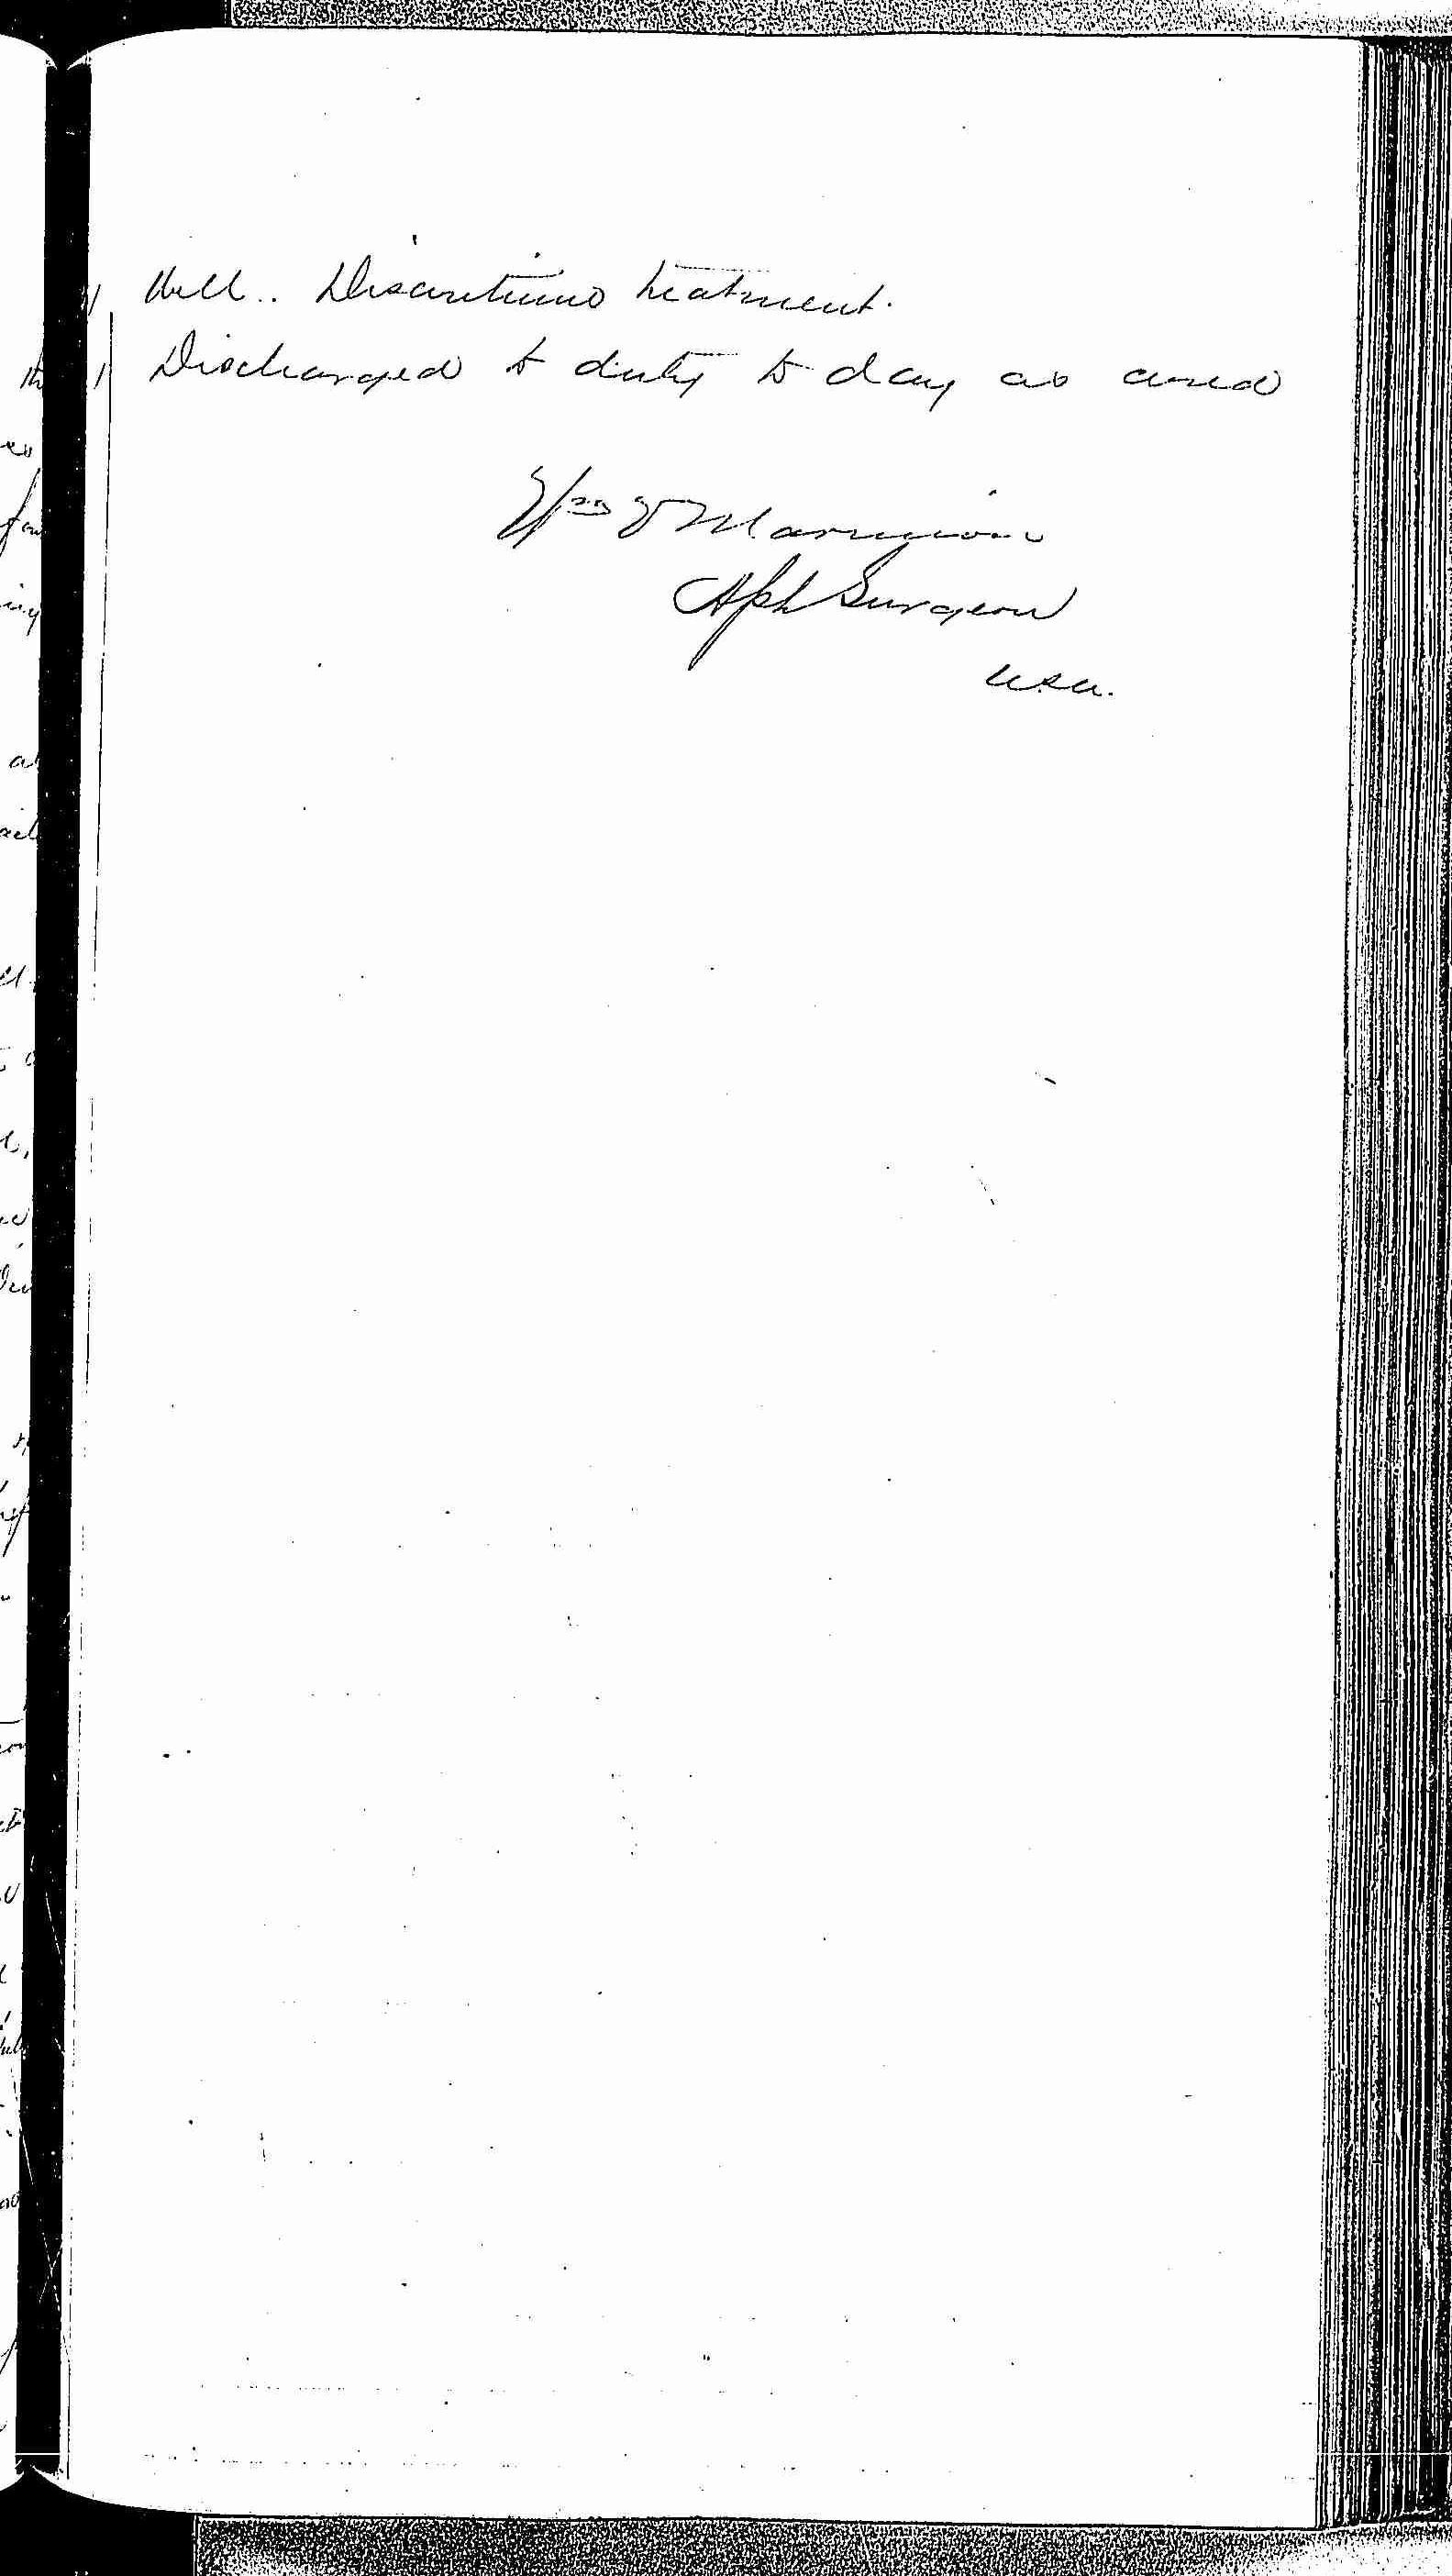 Entry for Richard Wakefield (page 3 of 3) in the log Hospital Tickets and Case Papers - Naval Hospital - Washington, D.C. - 1868-69